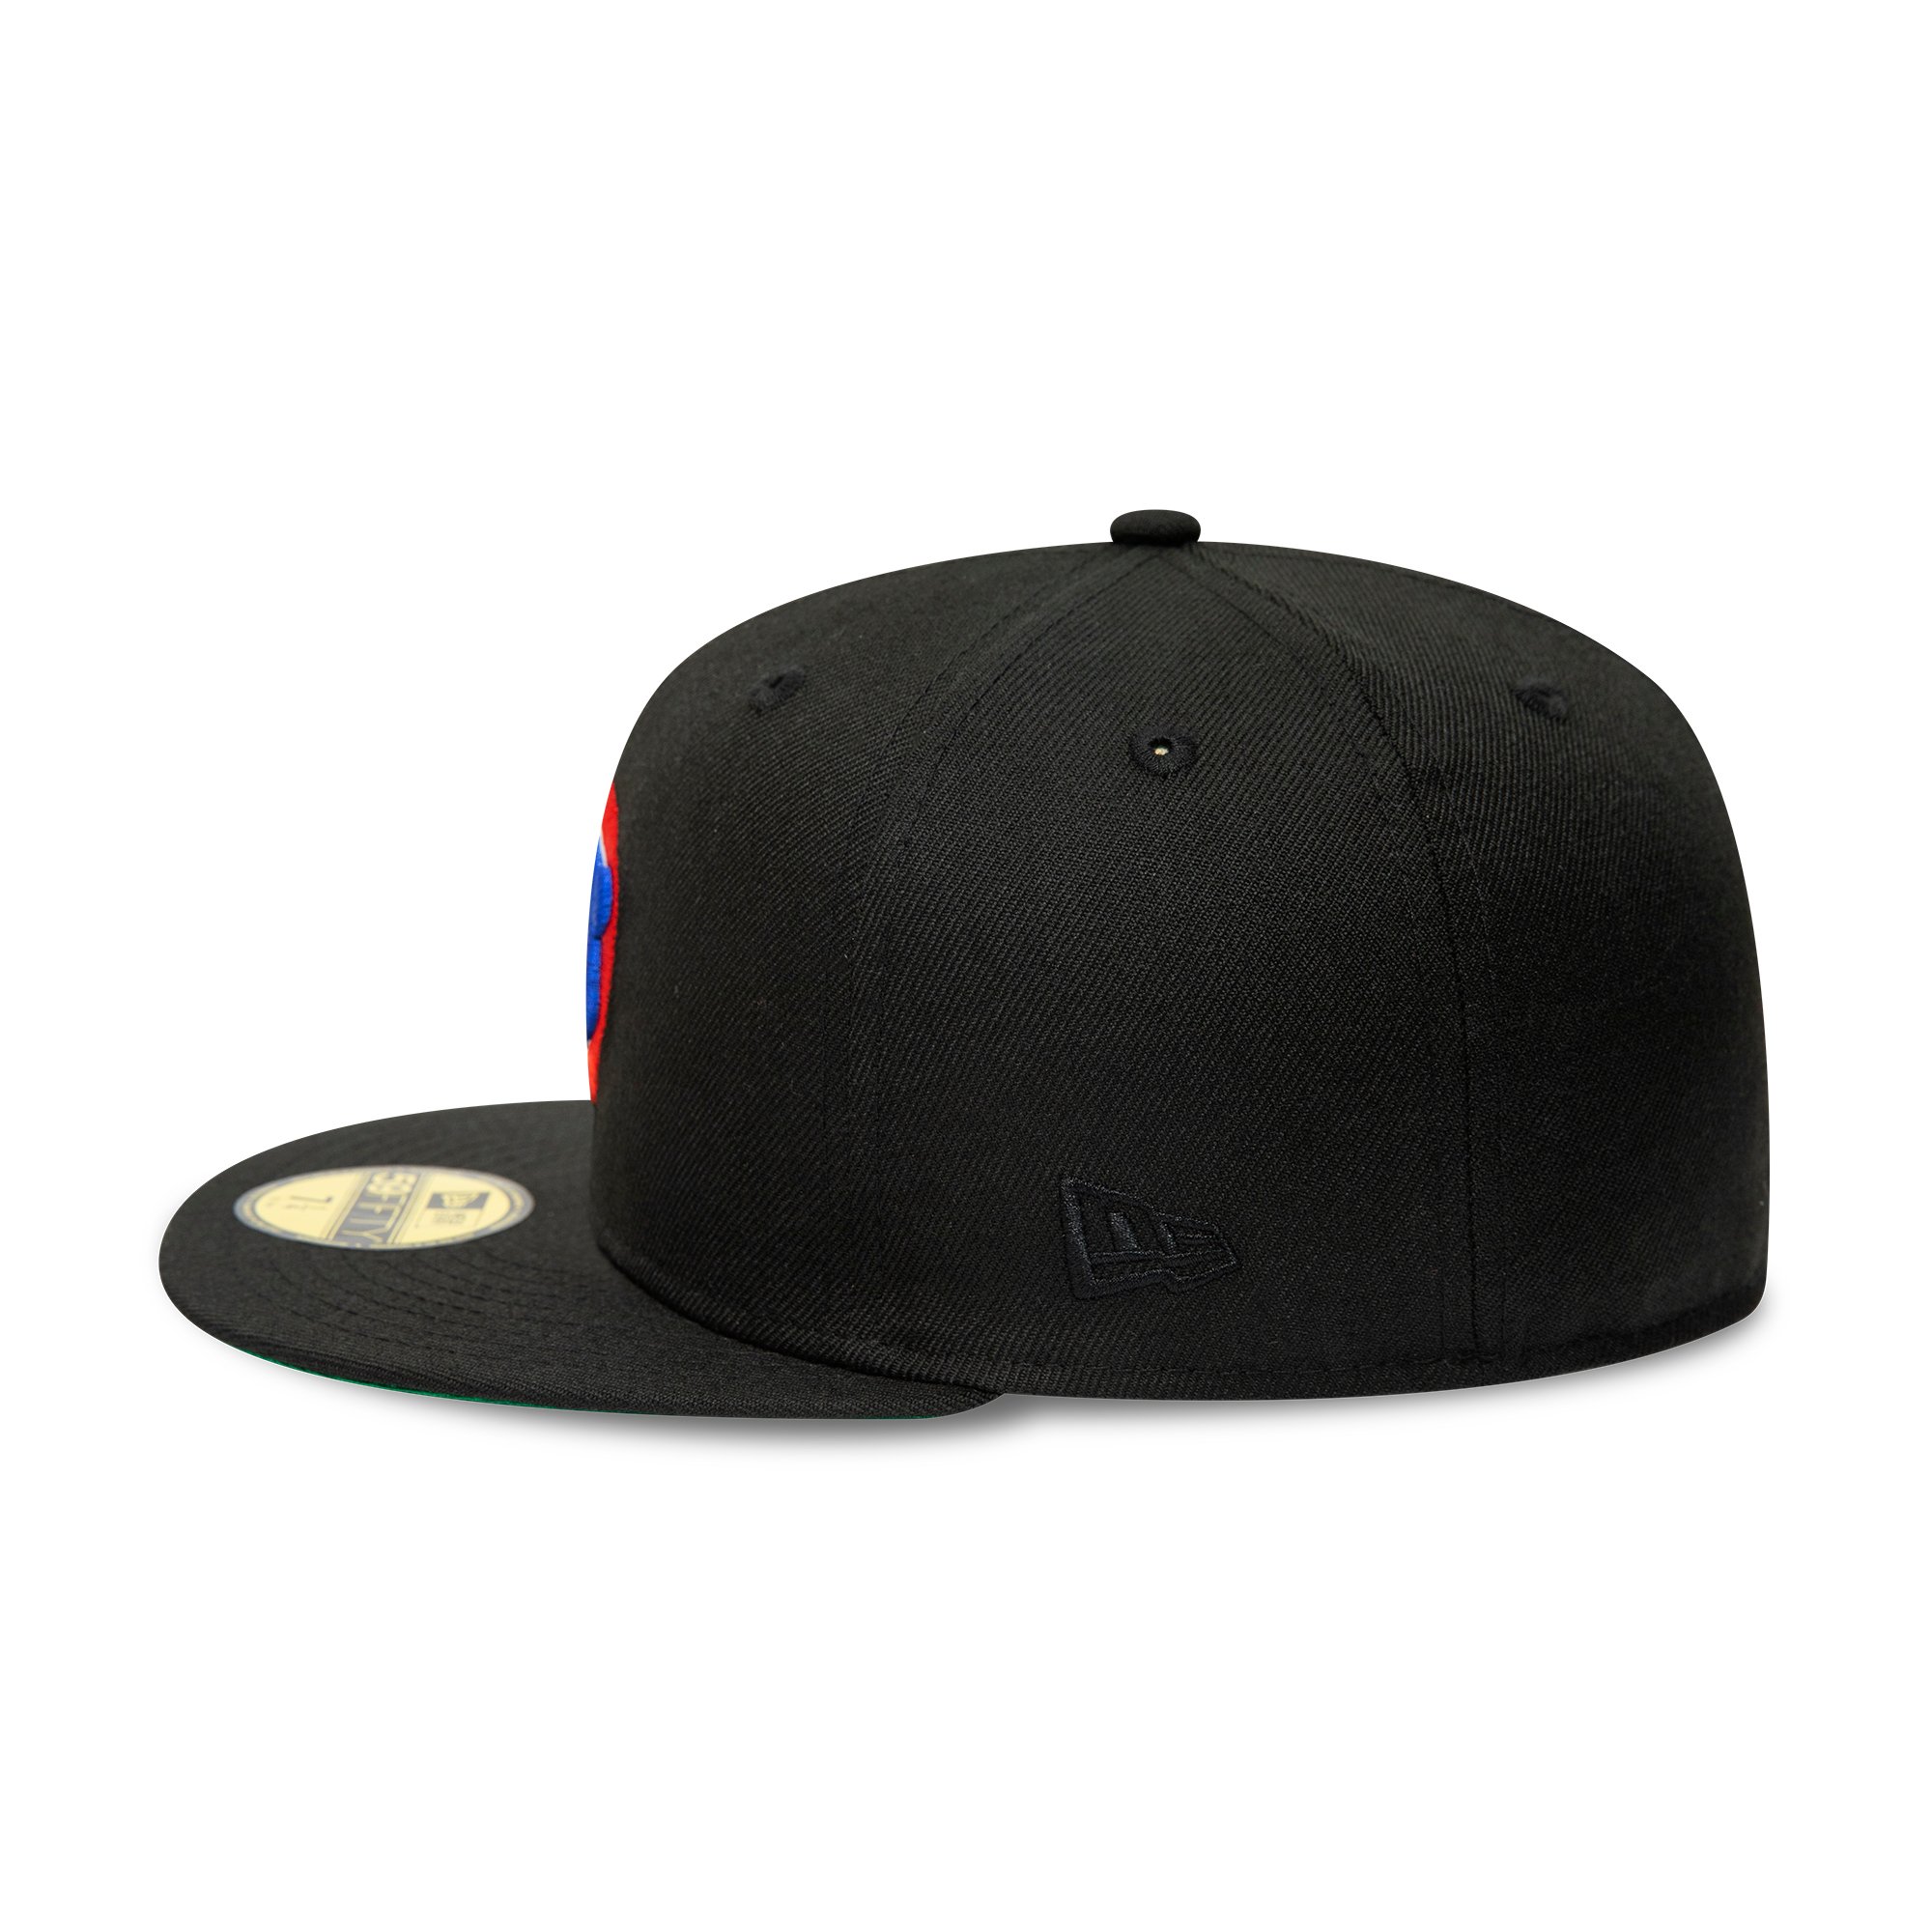 Chicago Cubs 1990 All Star Game Black 59FIFTY Fitted Cap